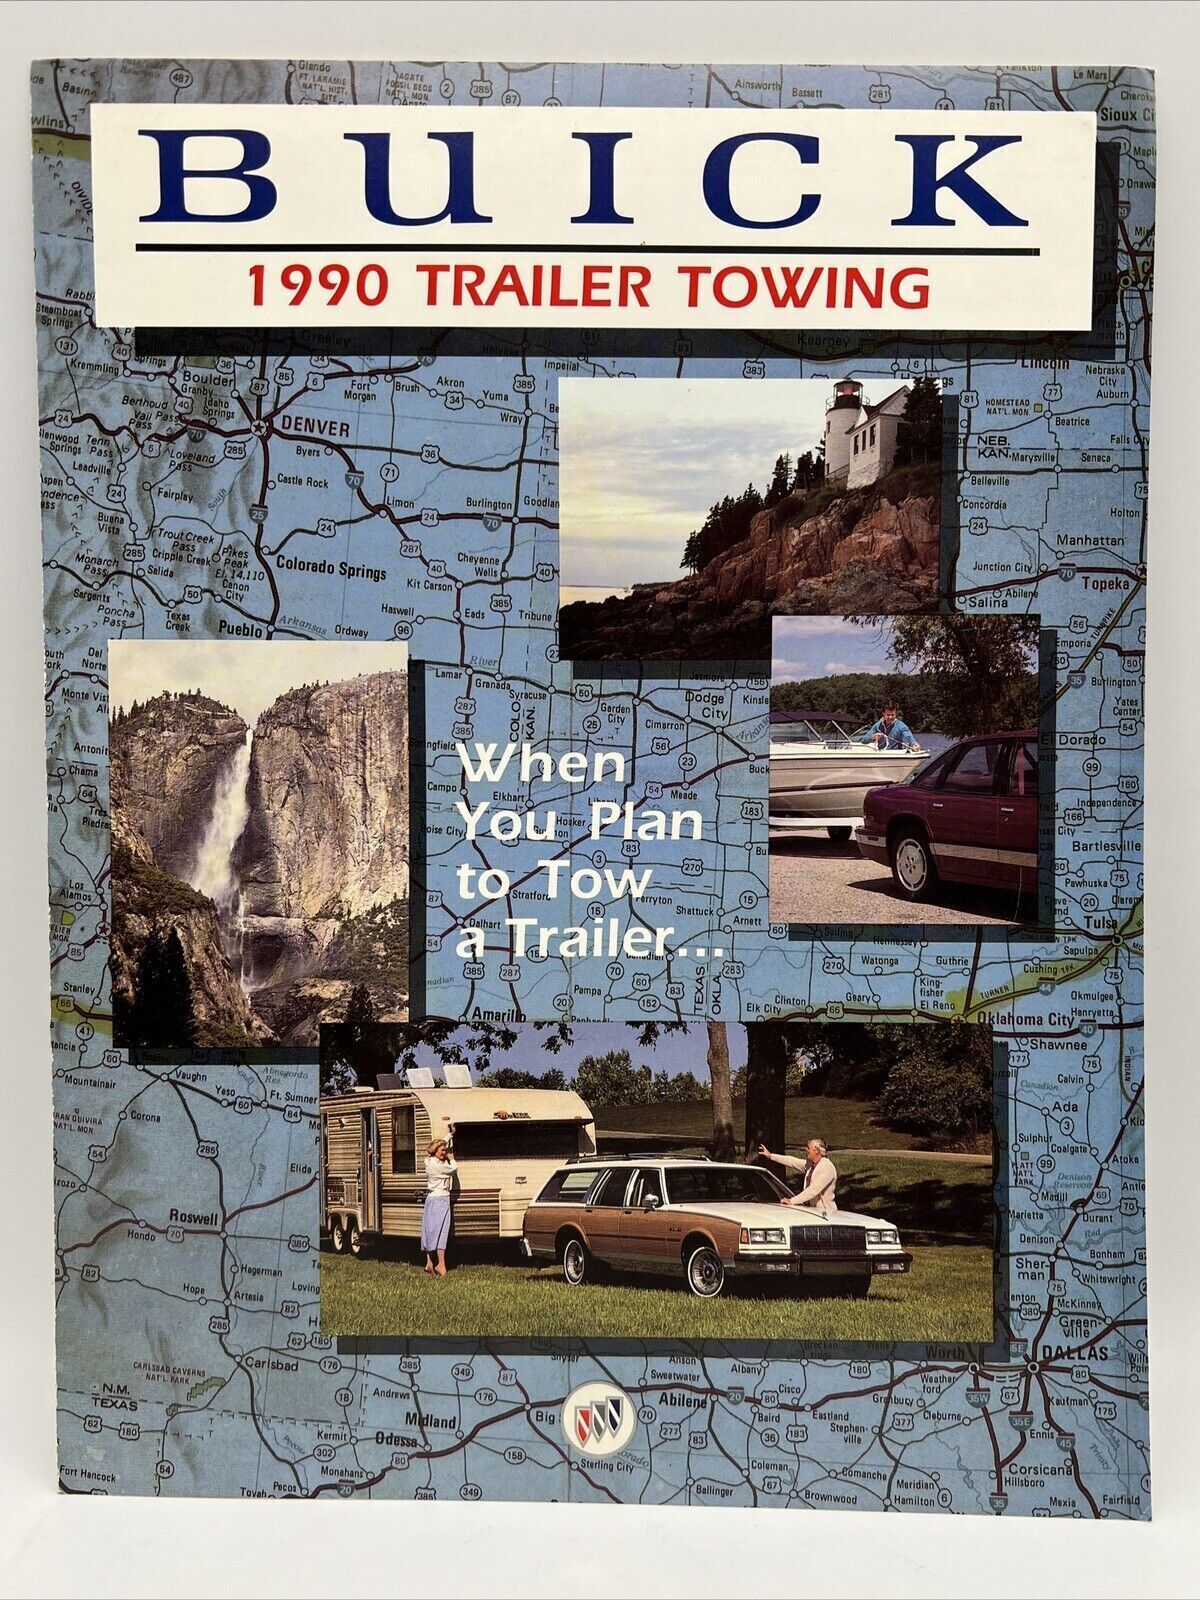 1990 BUICK TRAILER TOWING The Great American Road Auto Dealer Car Brochure Specs